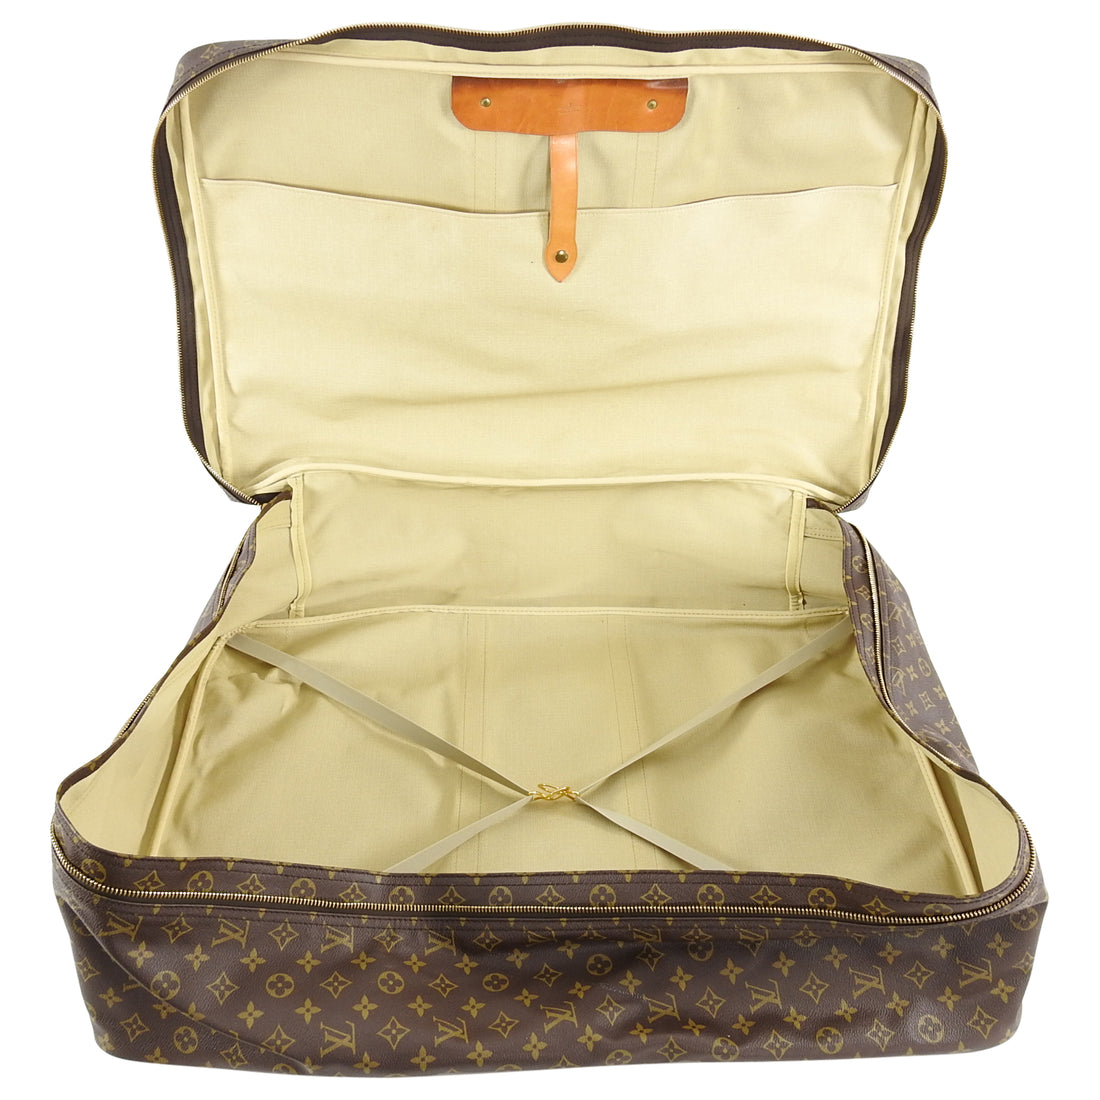 Louis Vuitton Sirius 70 travel bag Louis Vuitton Sirius 70 monogram canvas  soft sided luggage/travel bag item was used once and in excellent conditio